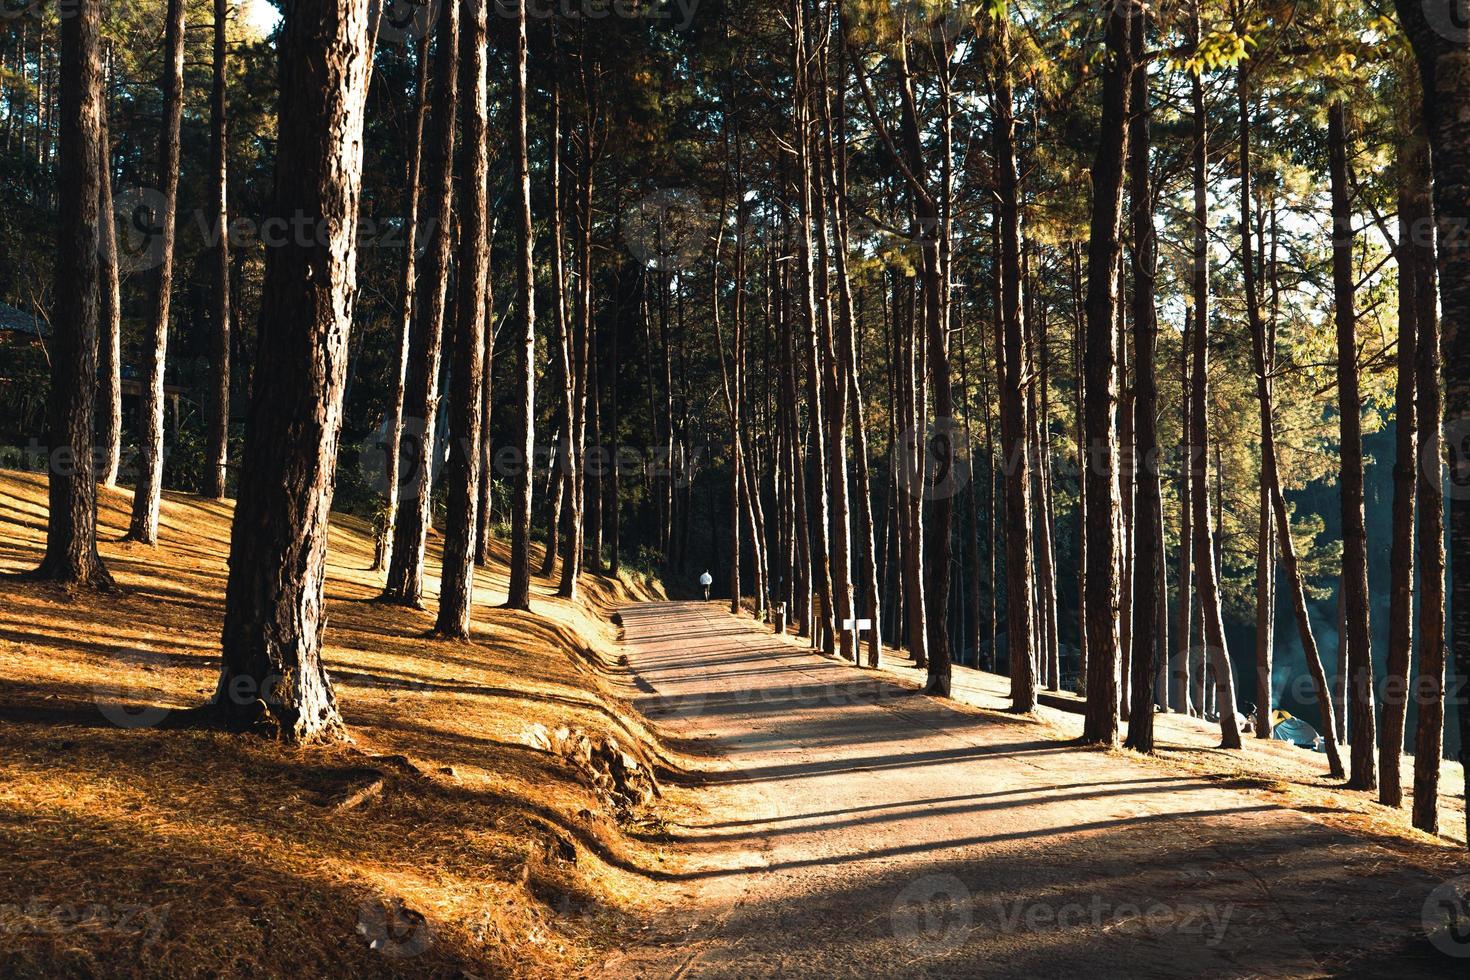 Pine forest and camping area in the morning photo